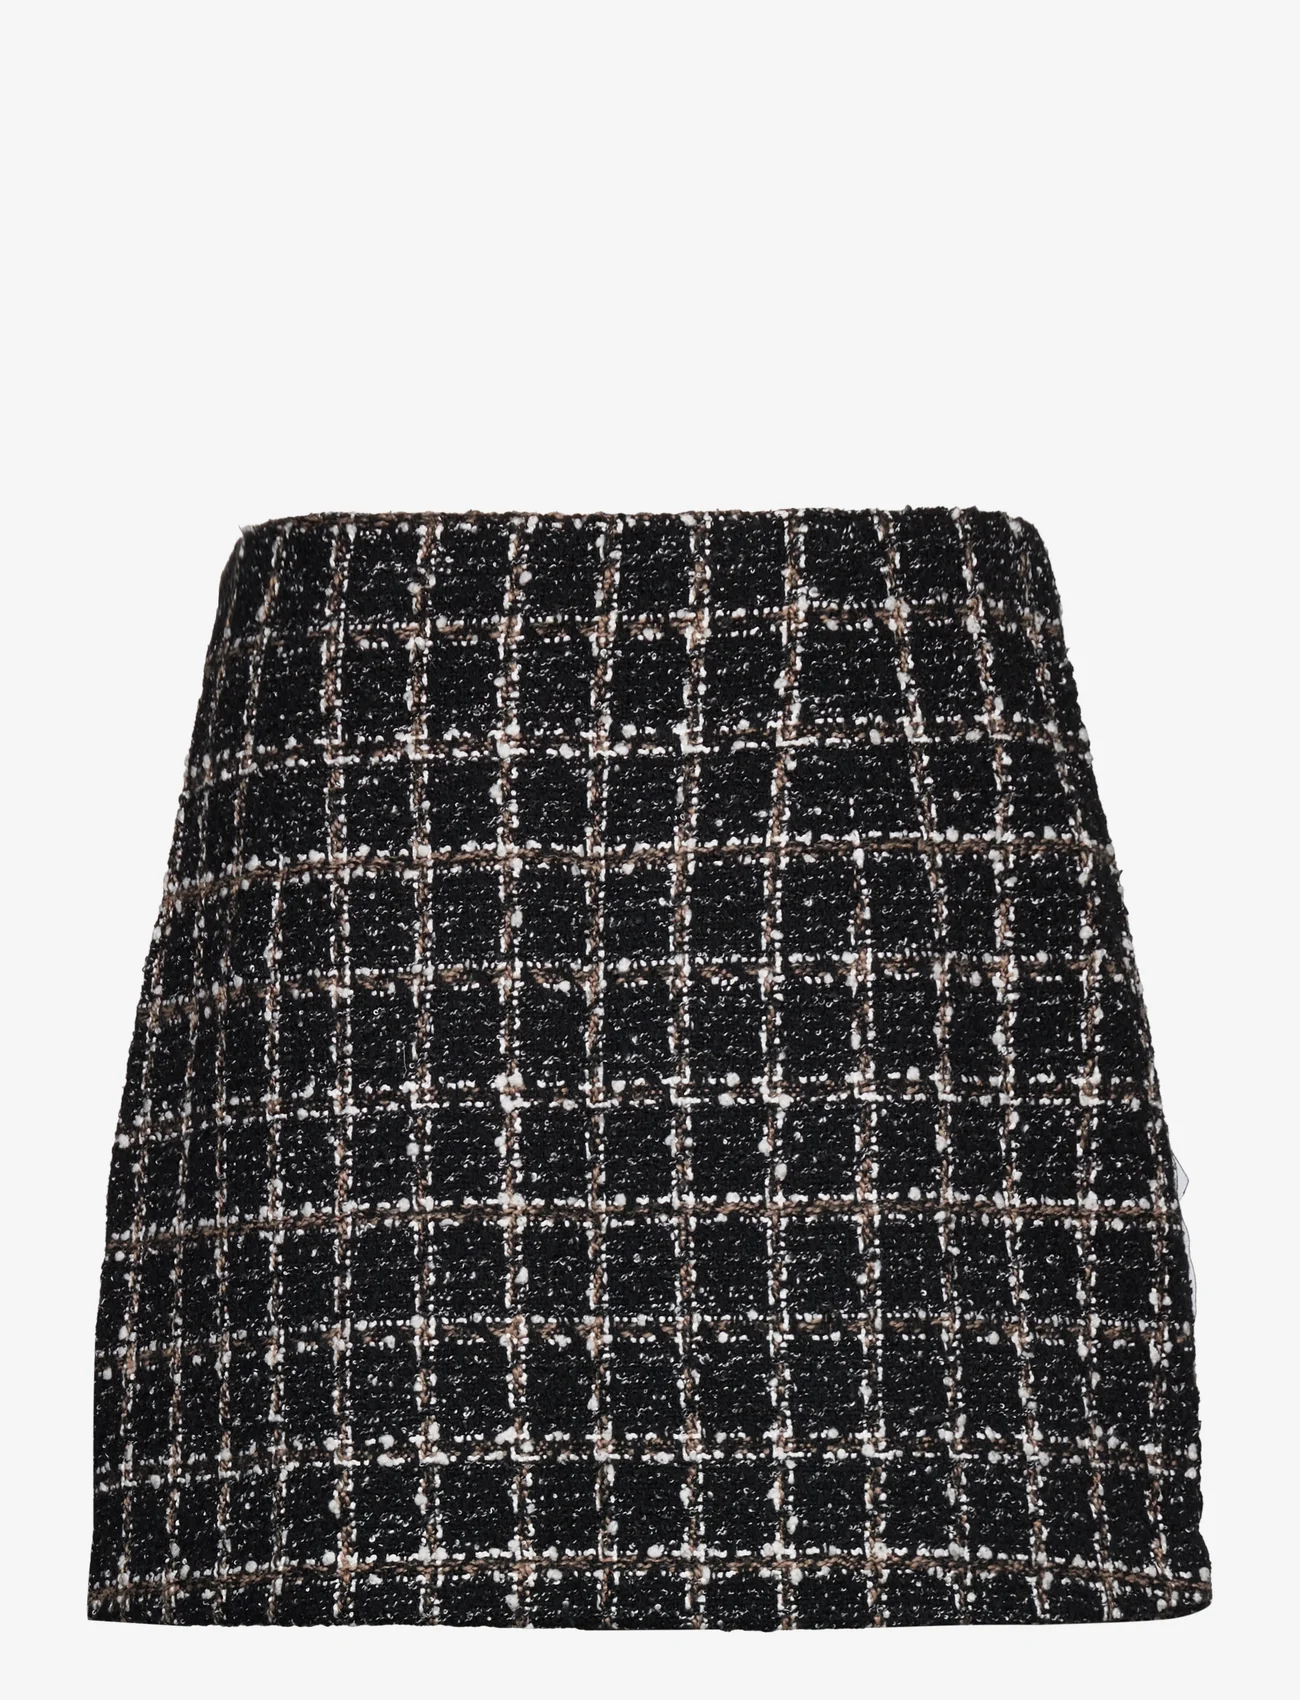 Abercrombie & Fitch - ANF WOMENS SKIRTS - short skirts - black and white tweed - 1